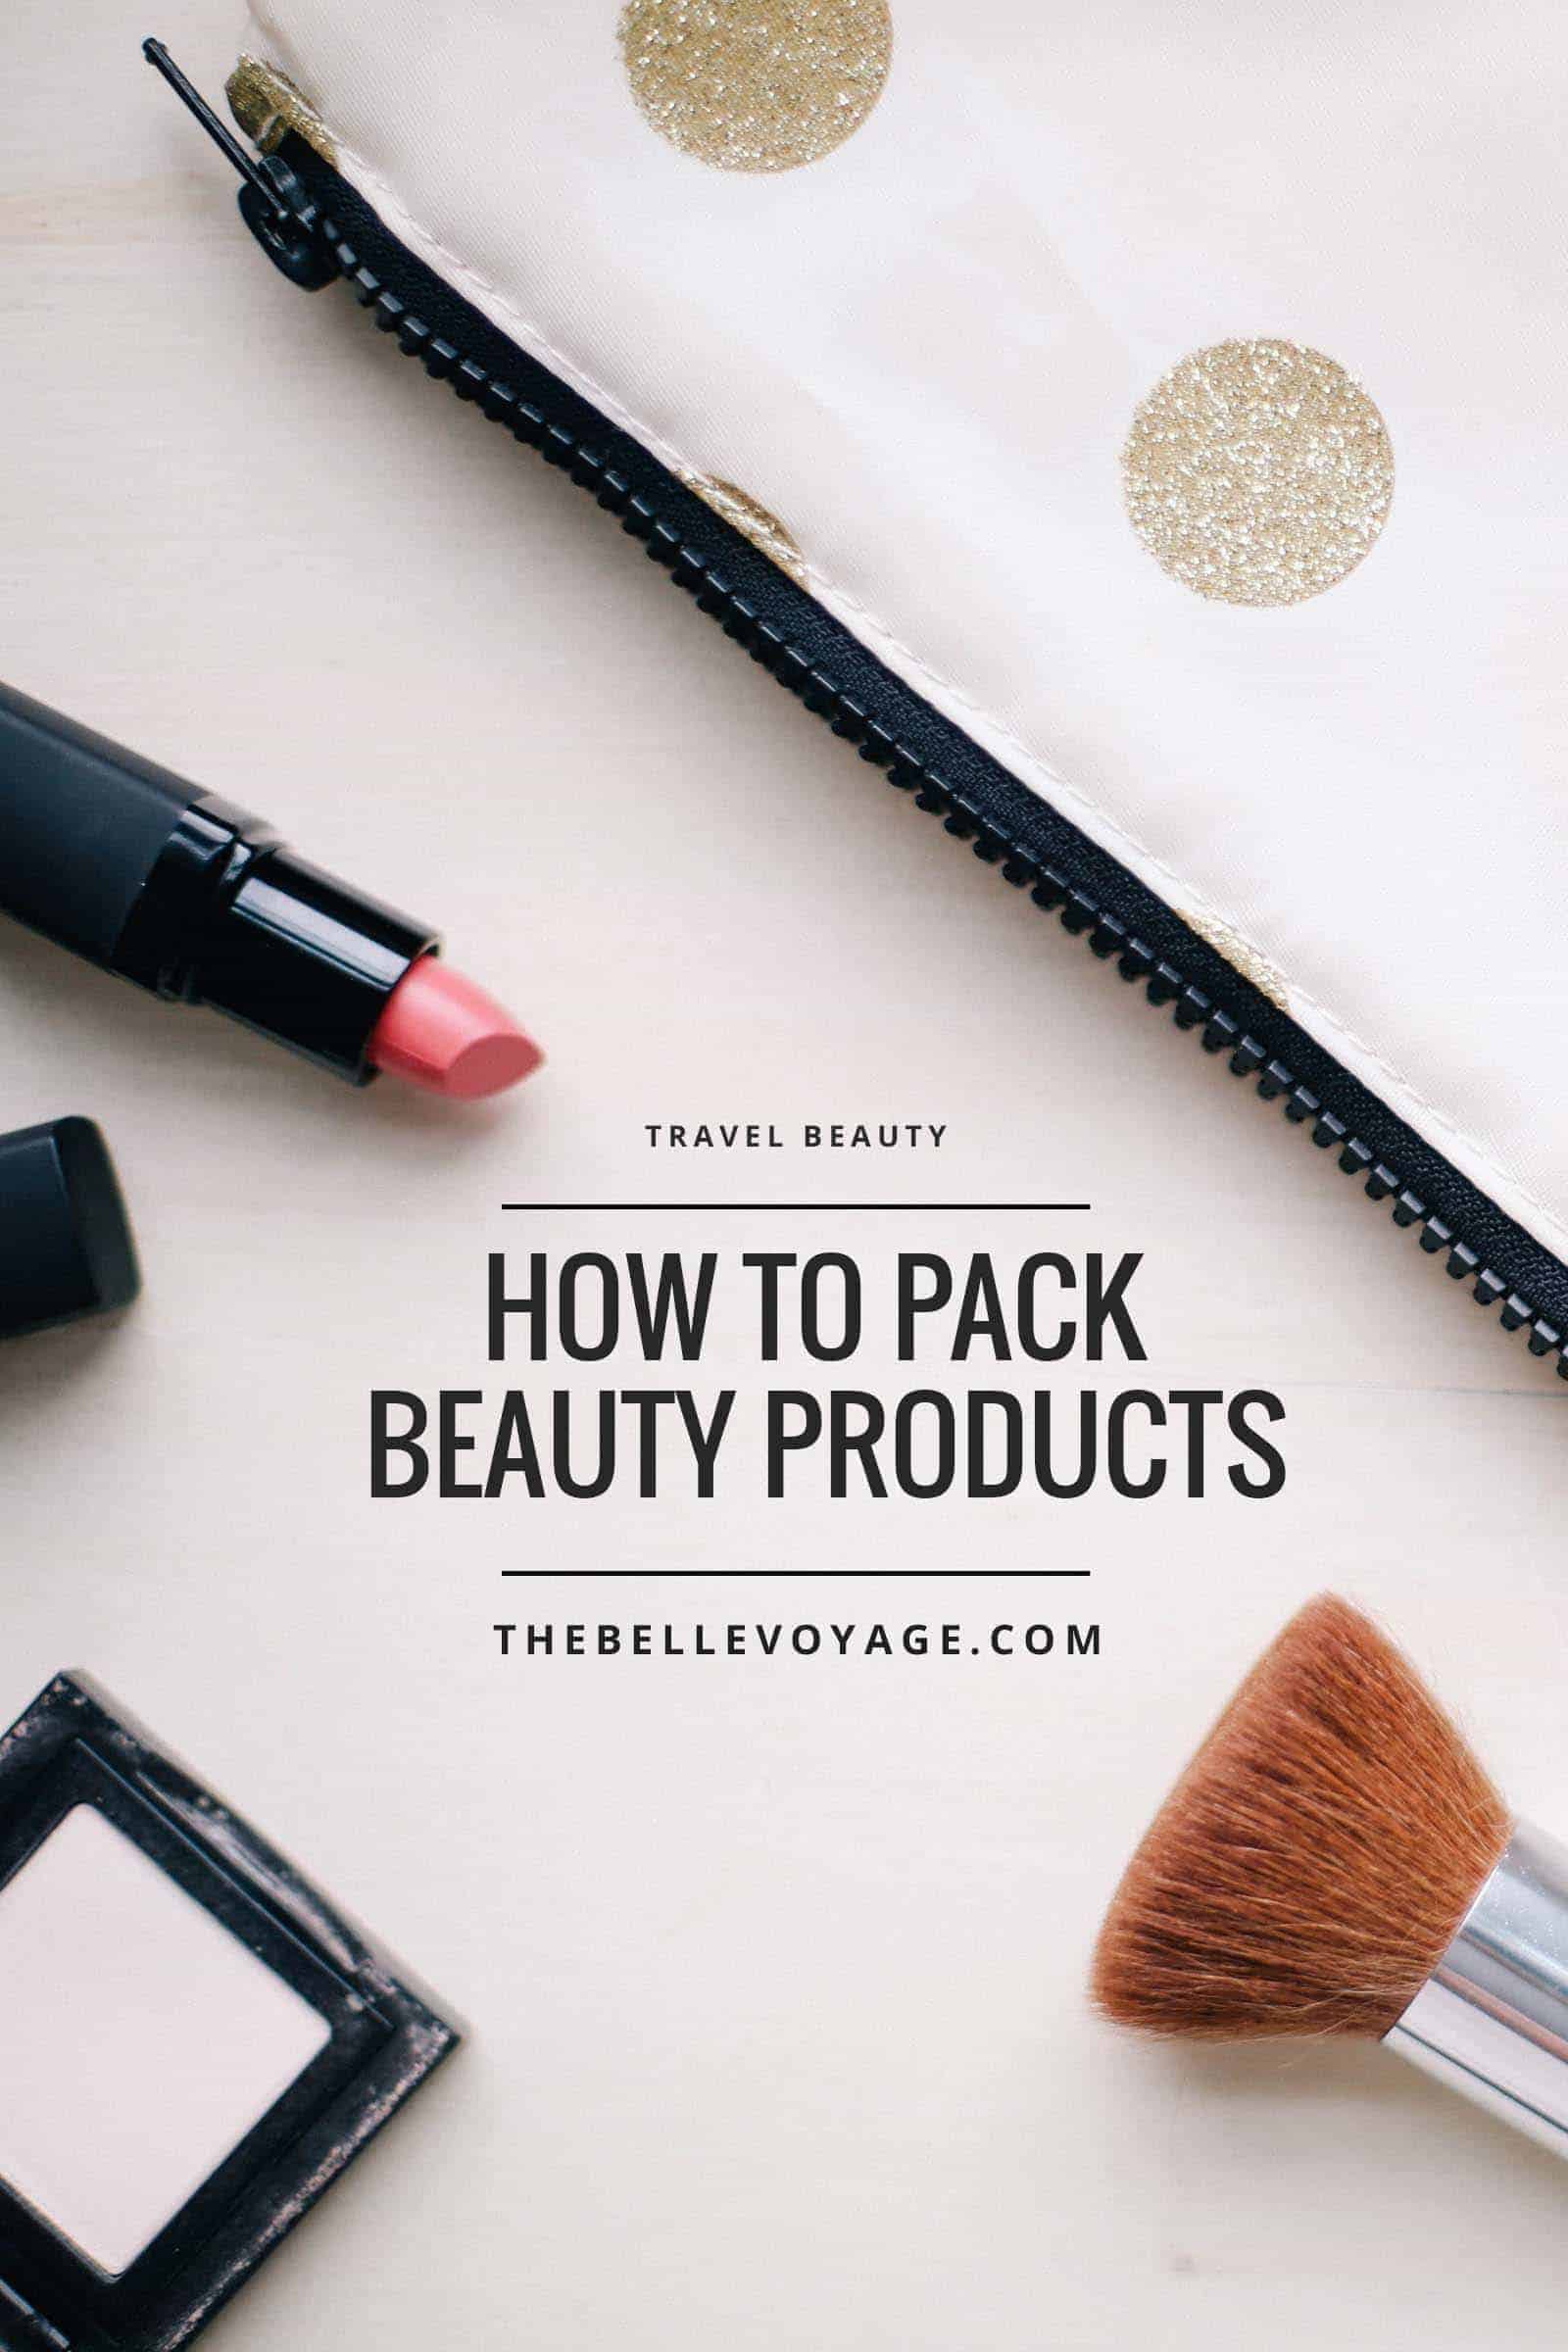 Packing Archives - The Beauty Look Book